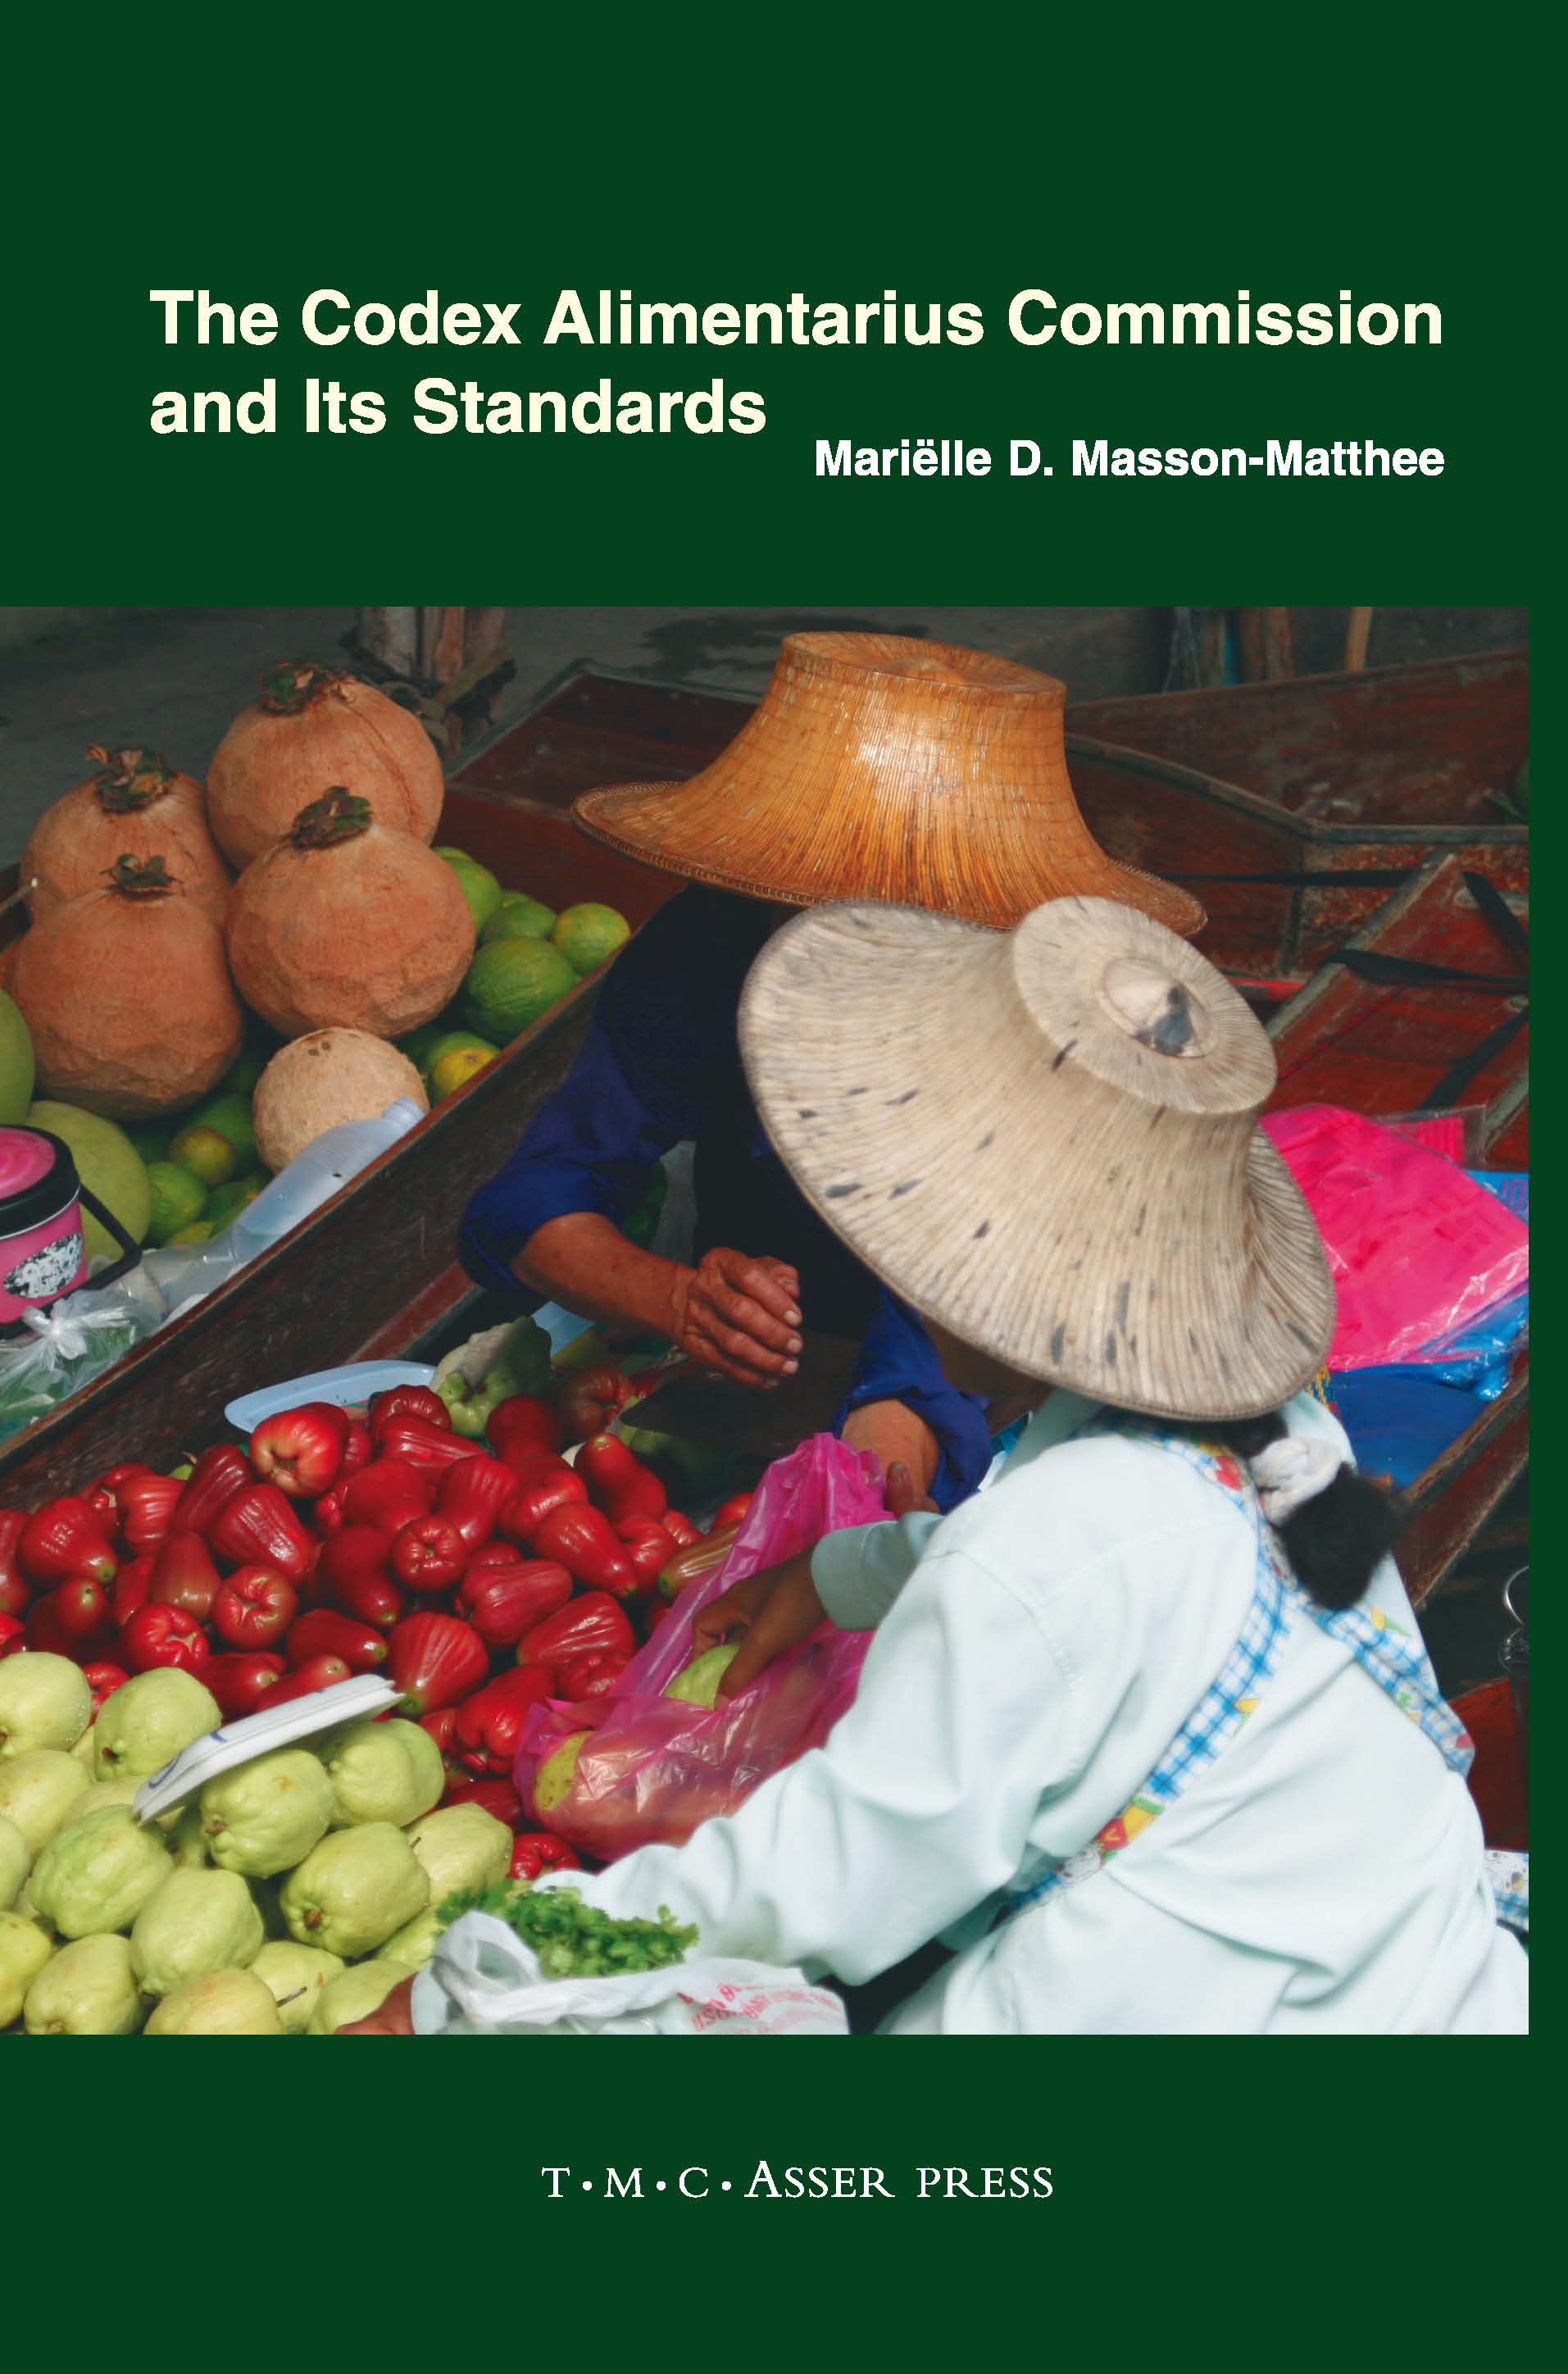 The Codex Alimentarius Commission and Its Standards